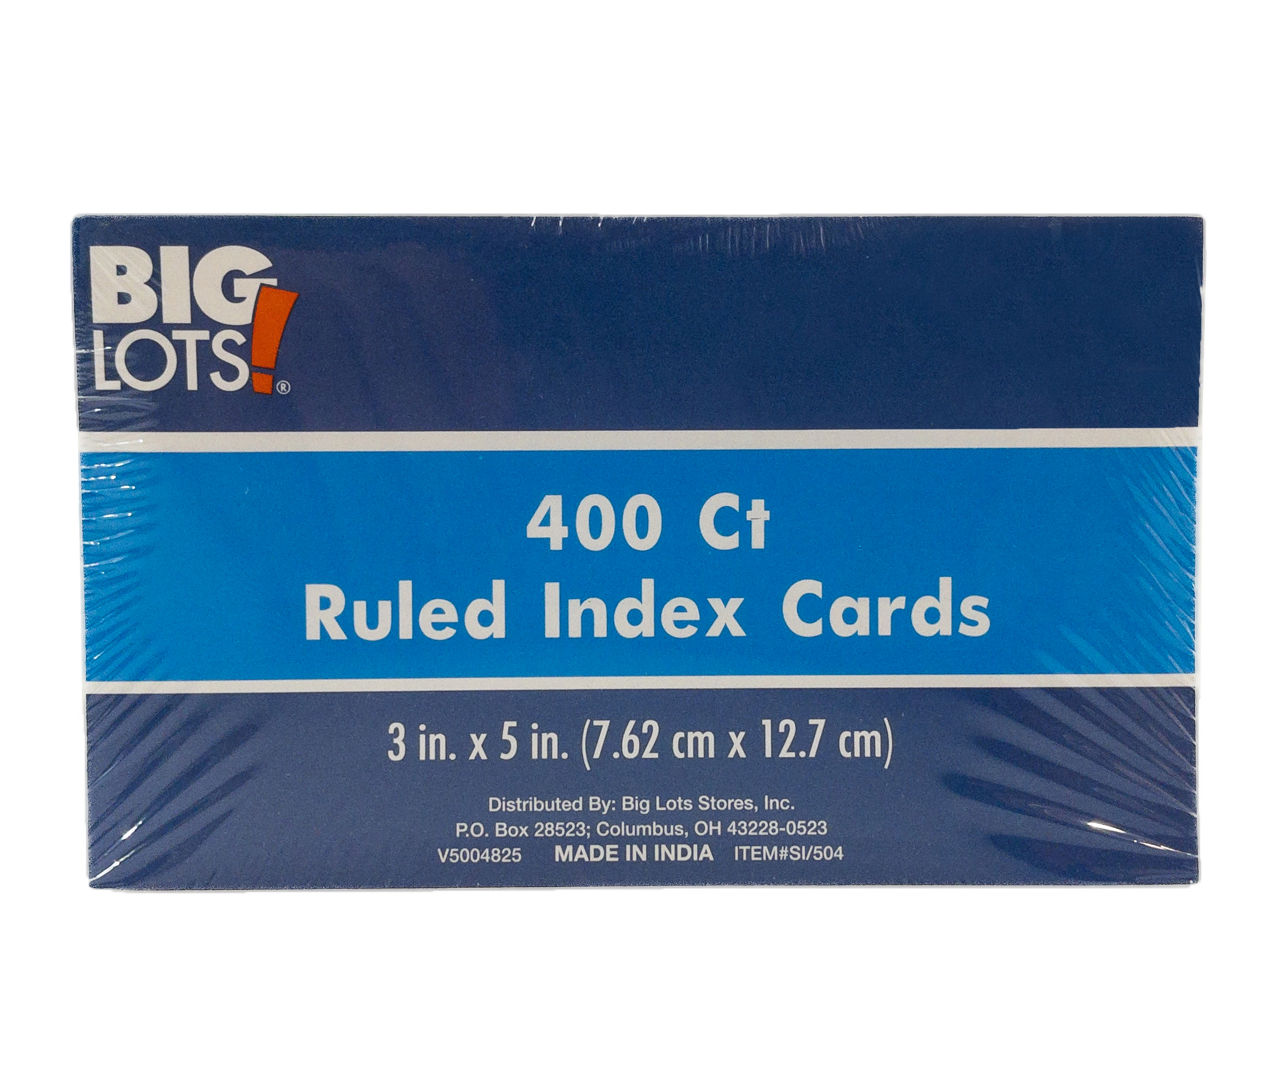 Jot White Ruled Index Cards, 125-ct.